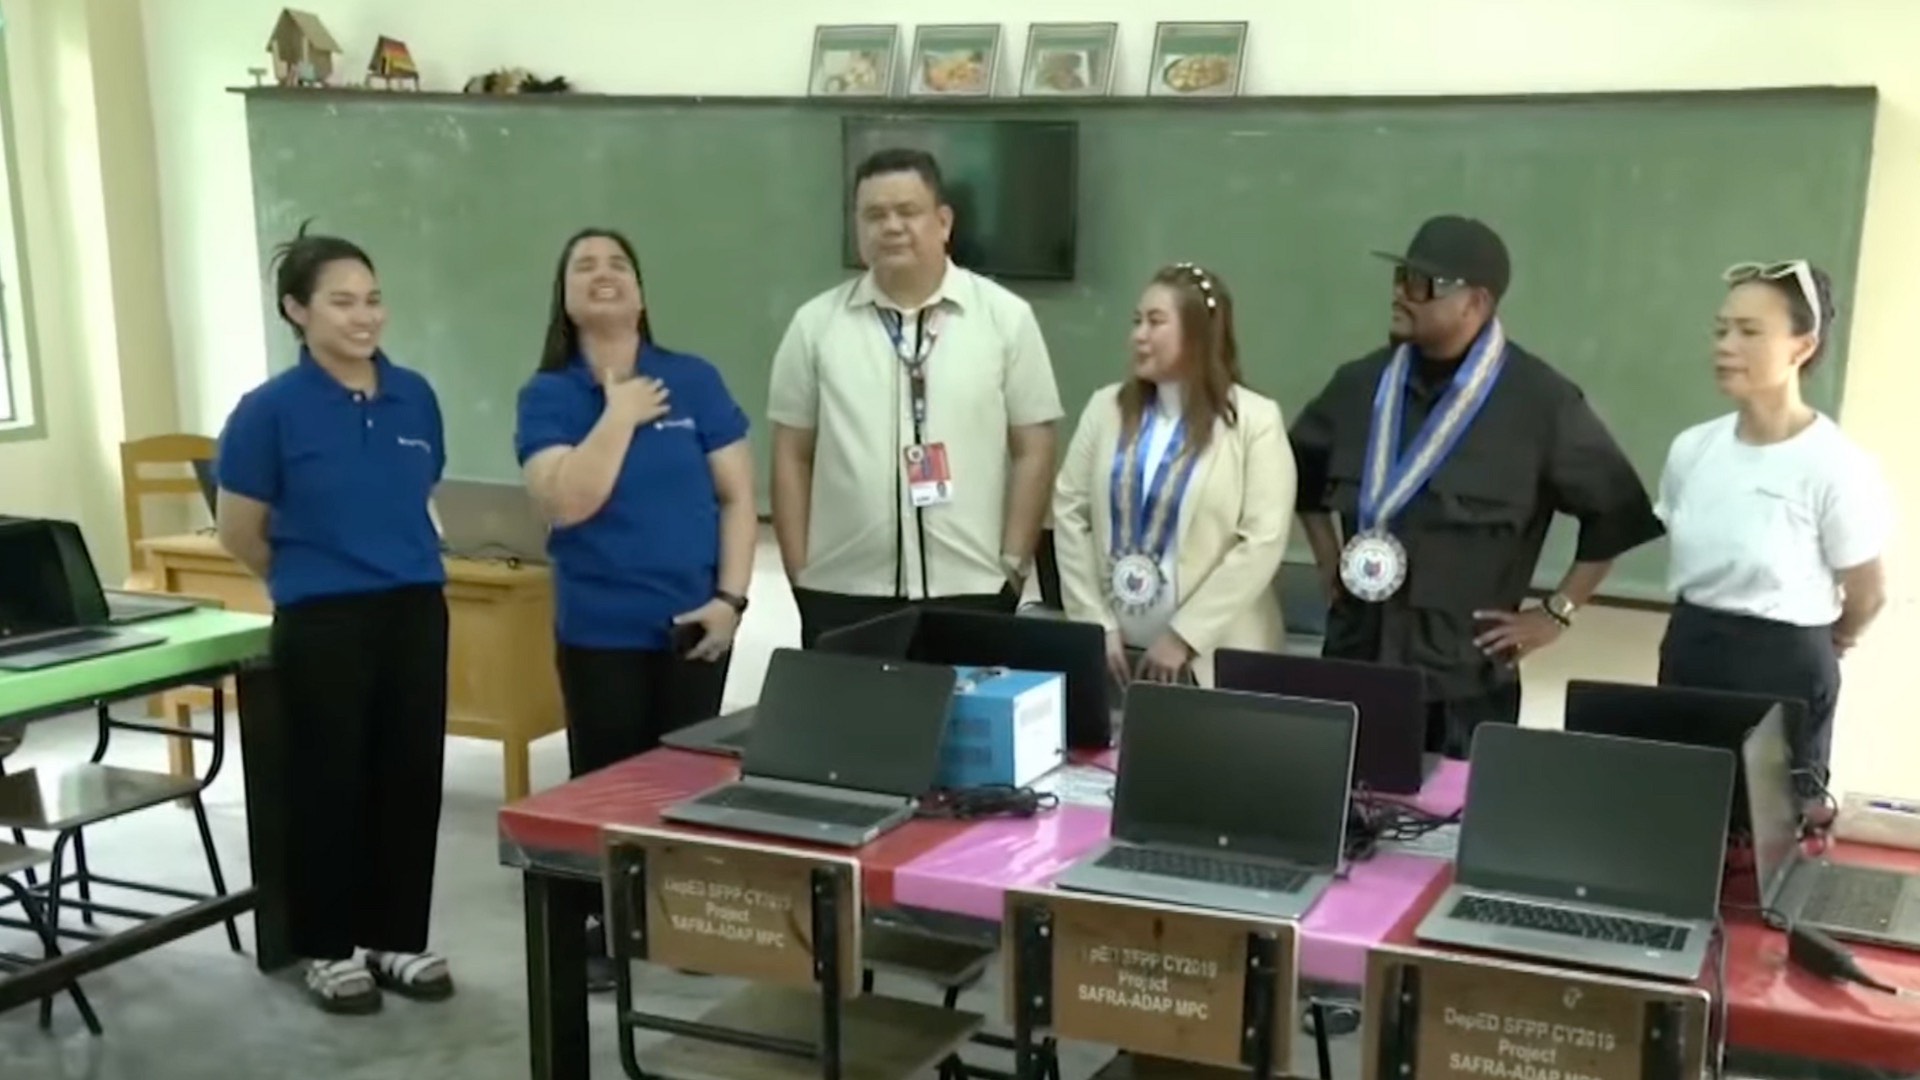 Apl.de.Ap. visits his Pampanga high school, collaborates with Khan Academy PH and Accenture PH to donate 50 laptops